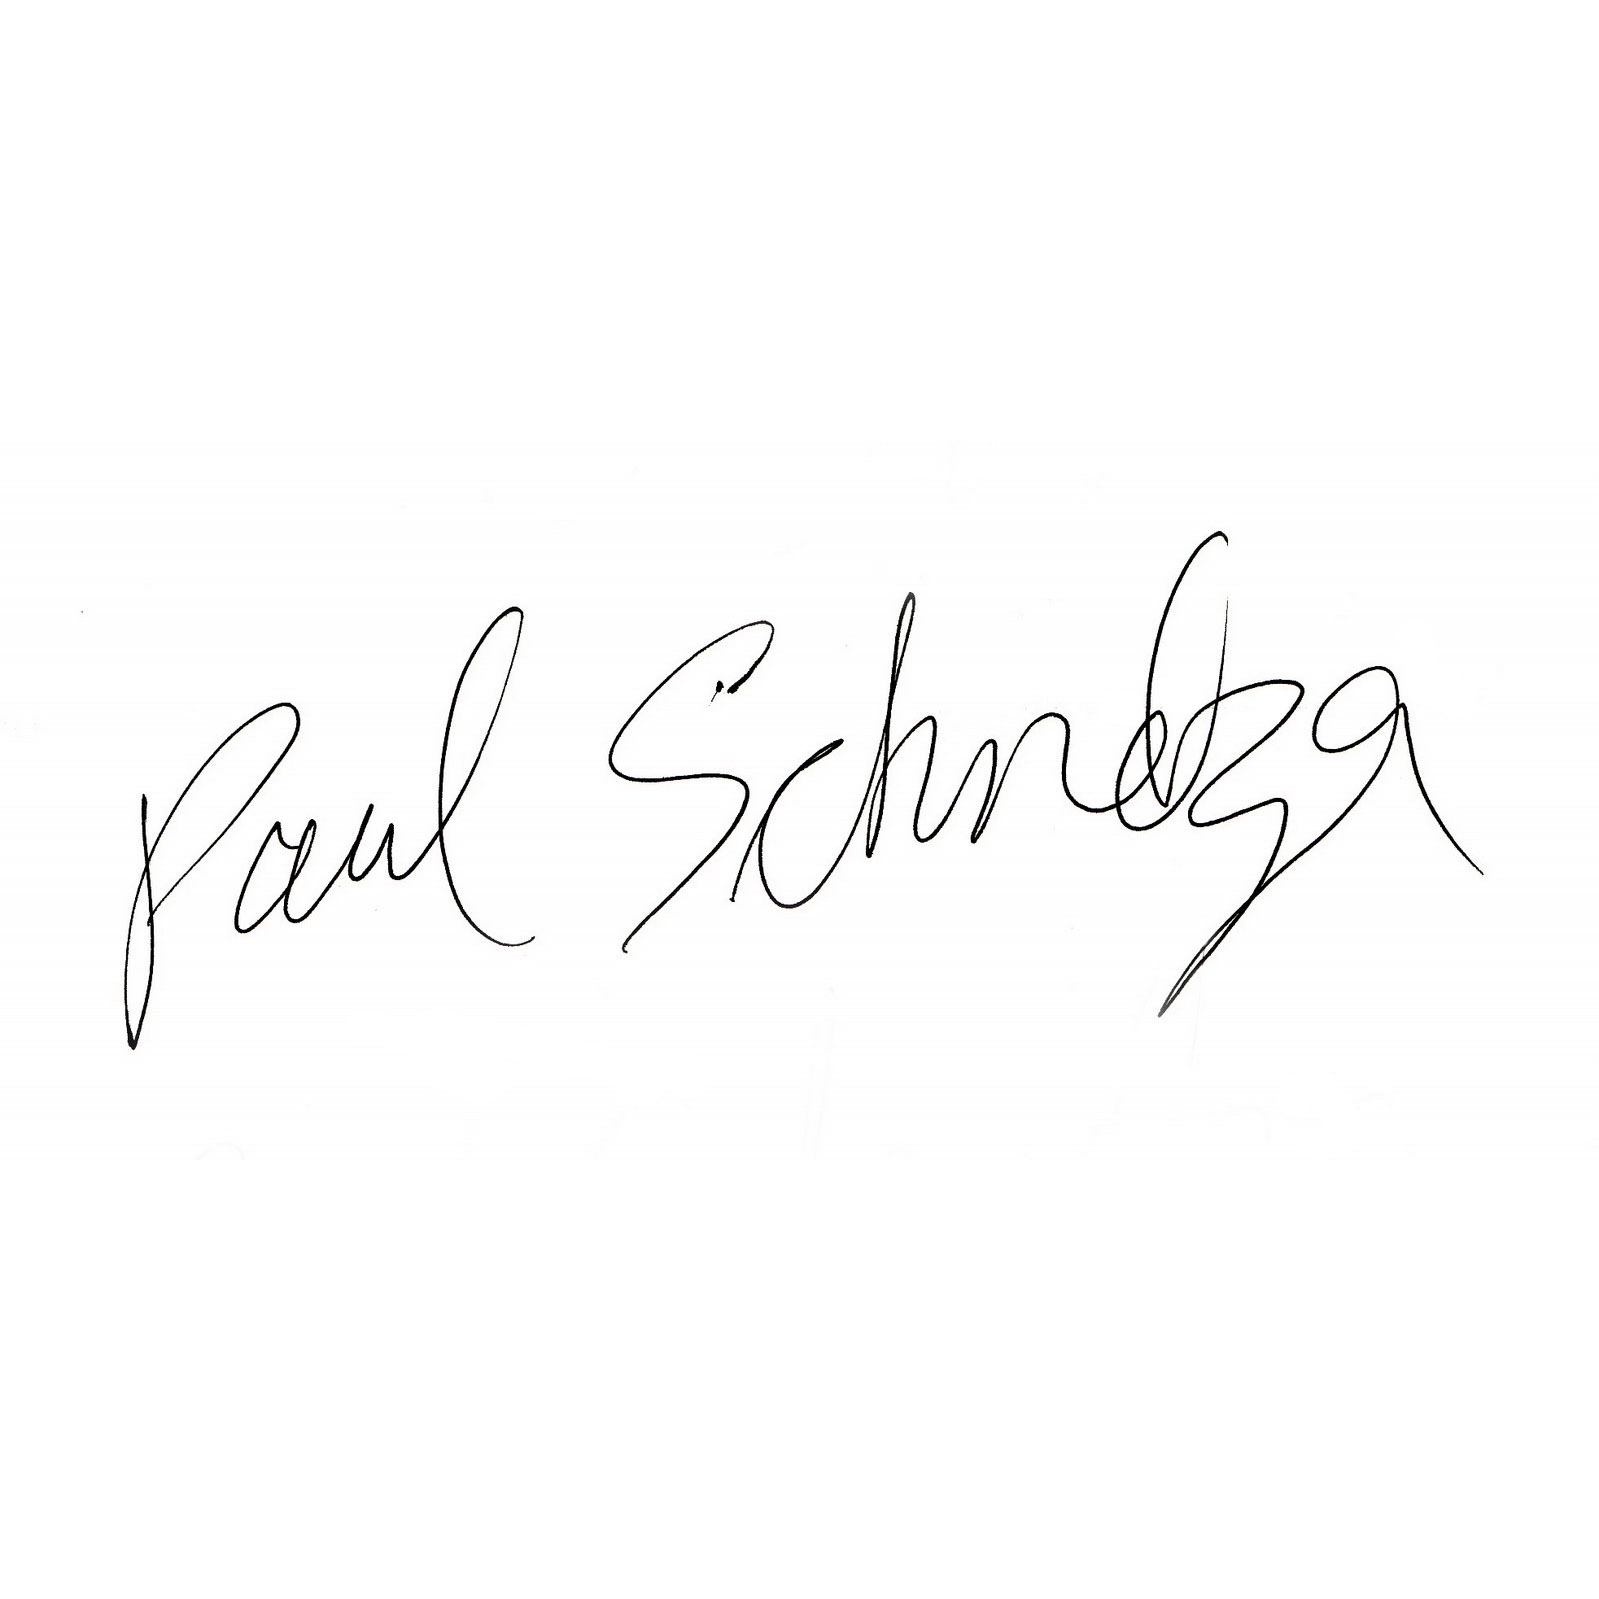  Paul Schmelzer as signed by Sonic Youth's Kim Gordon 